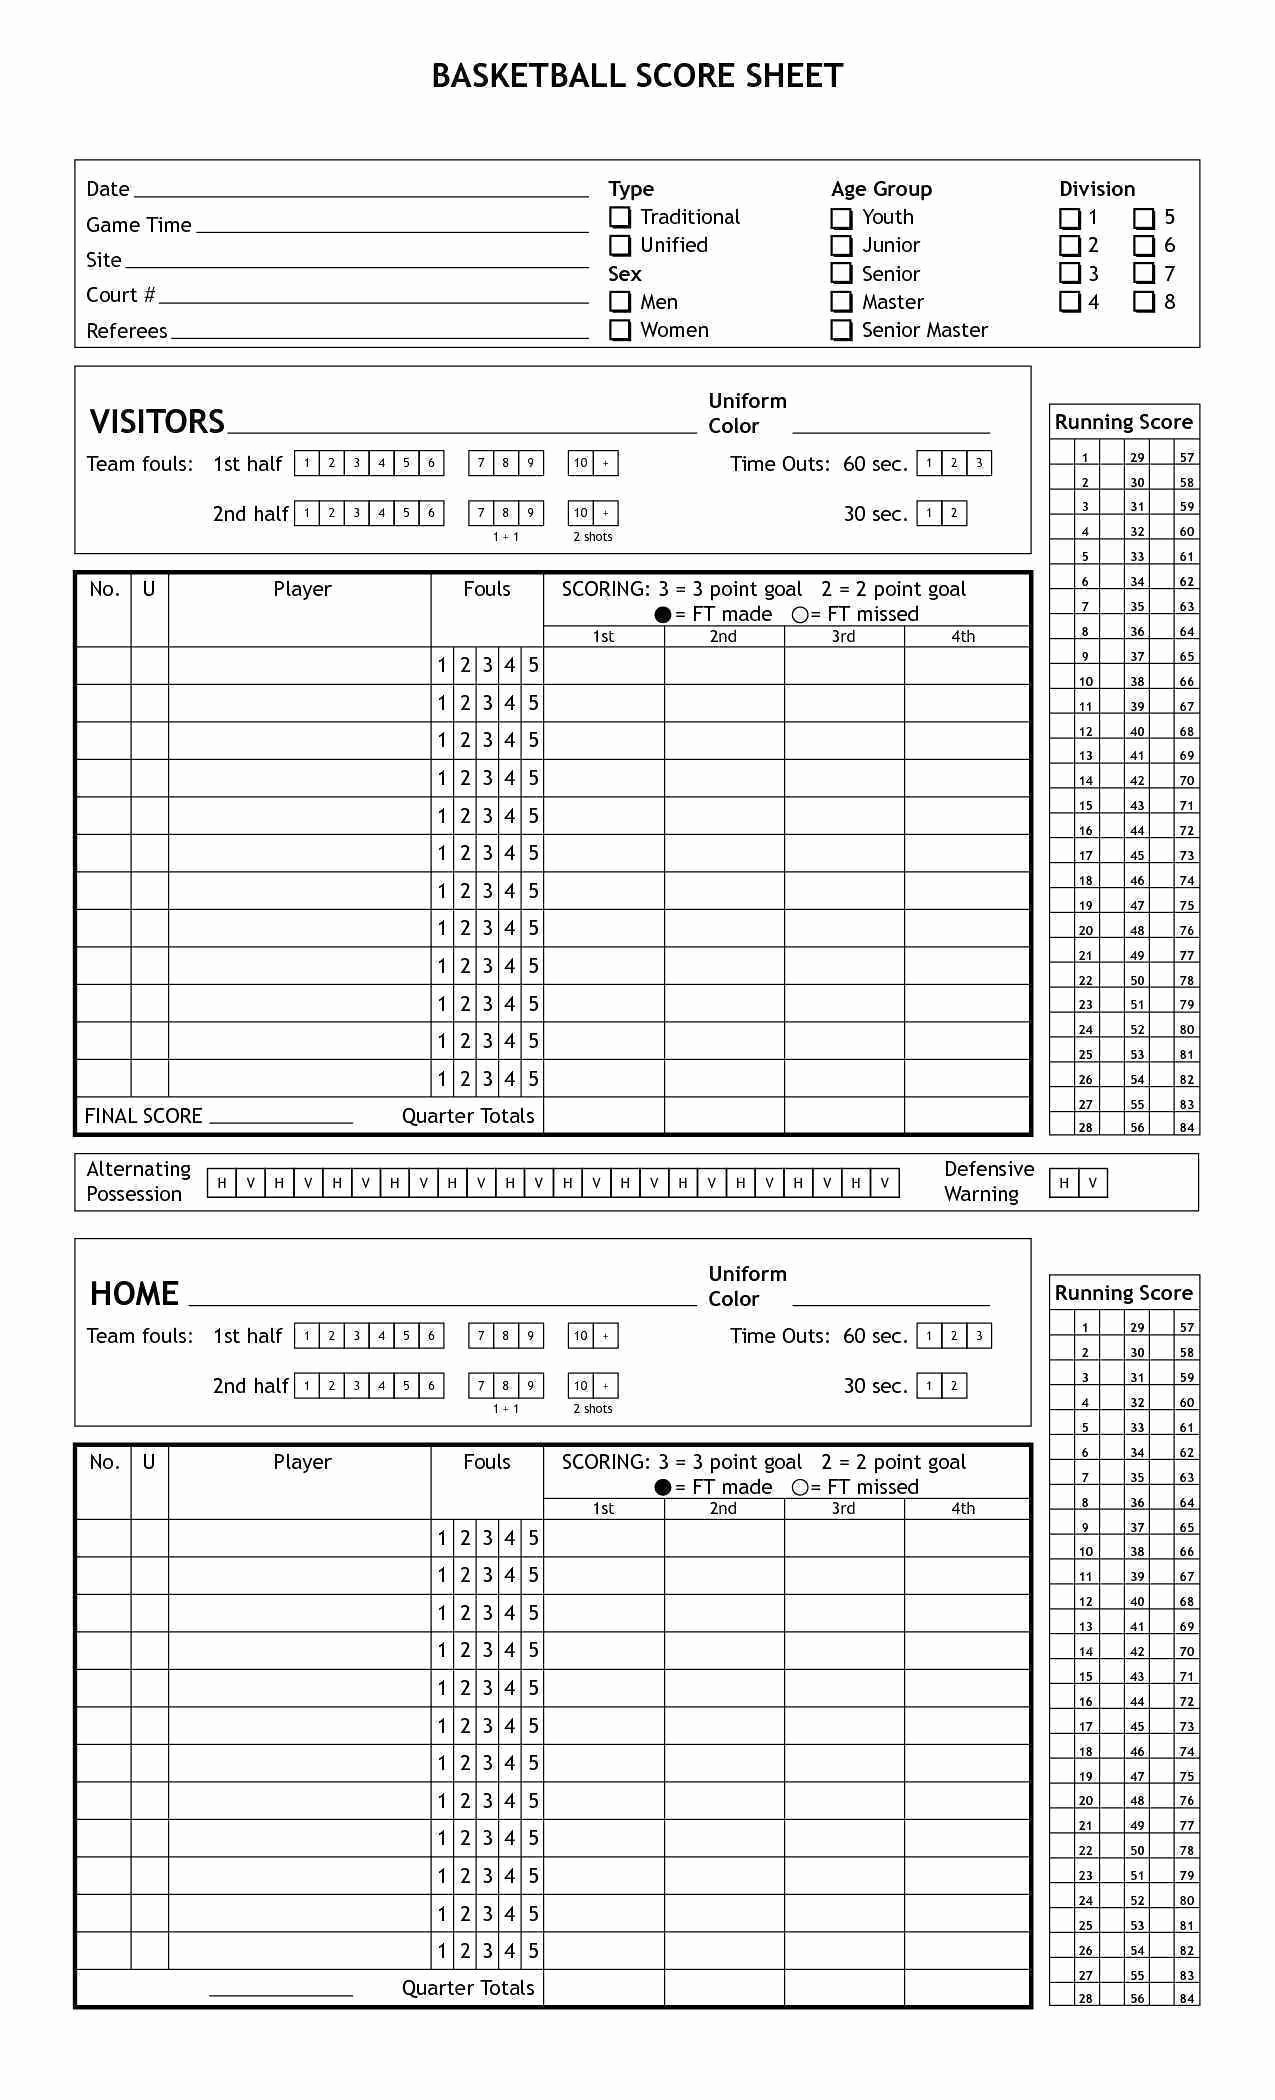 scouting report basketball sheets